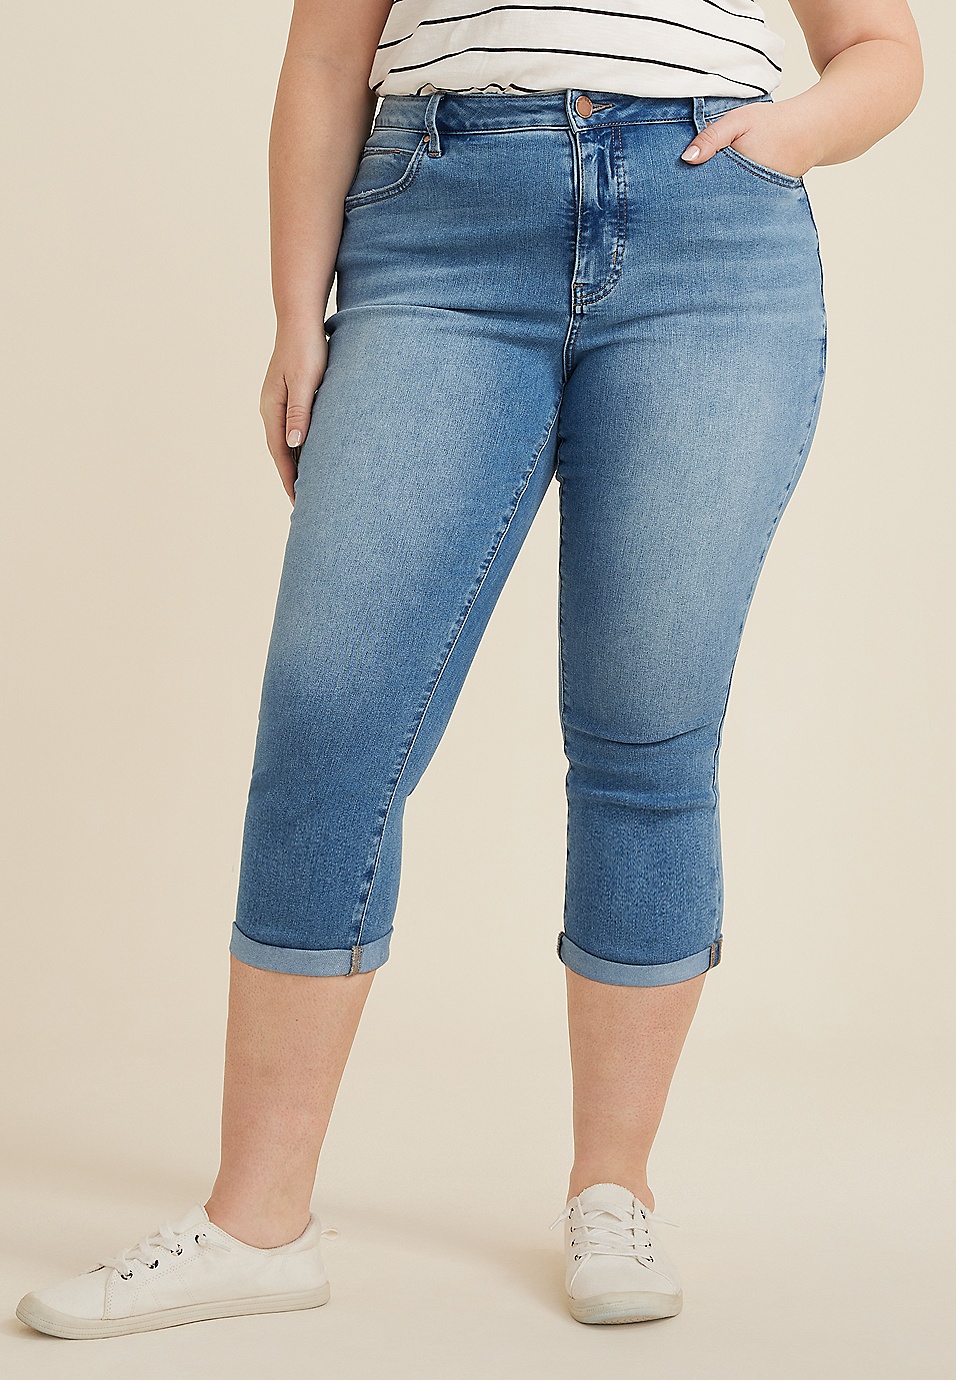 Plus Size m jeans by maurices™ Everflex™ High Rise Super Skinny Cropped Jean